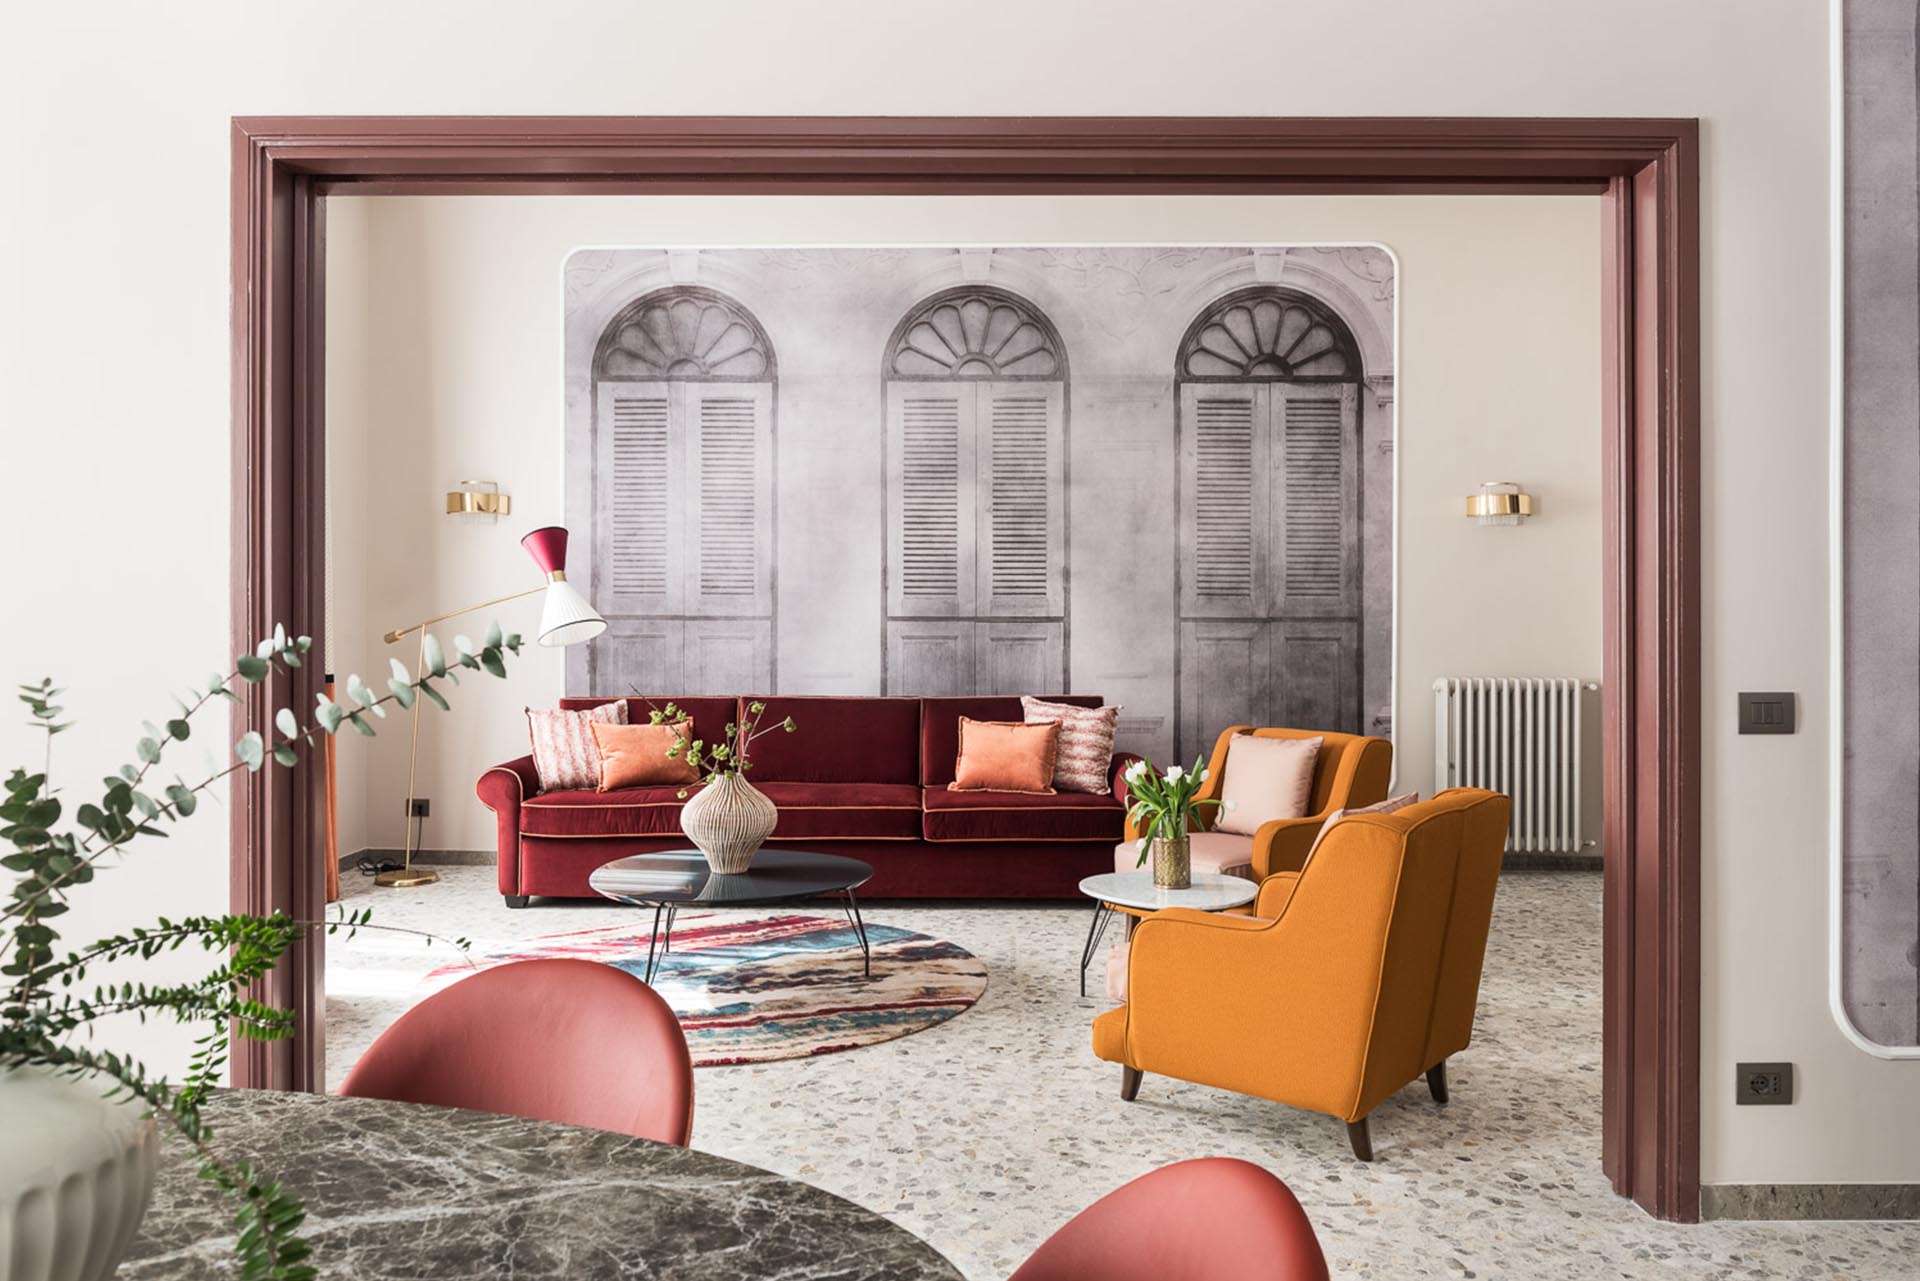 Rome Luxury Rental Apartments by THDP: when design speaks a “microlocal language”